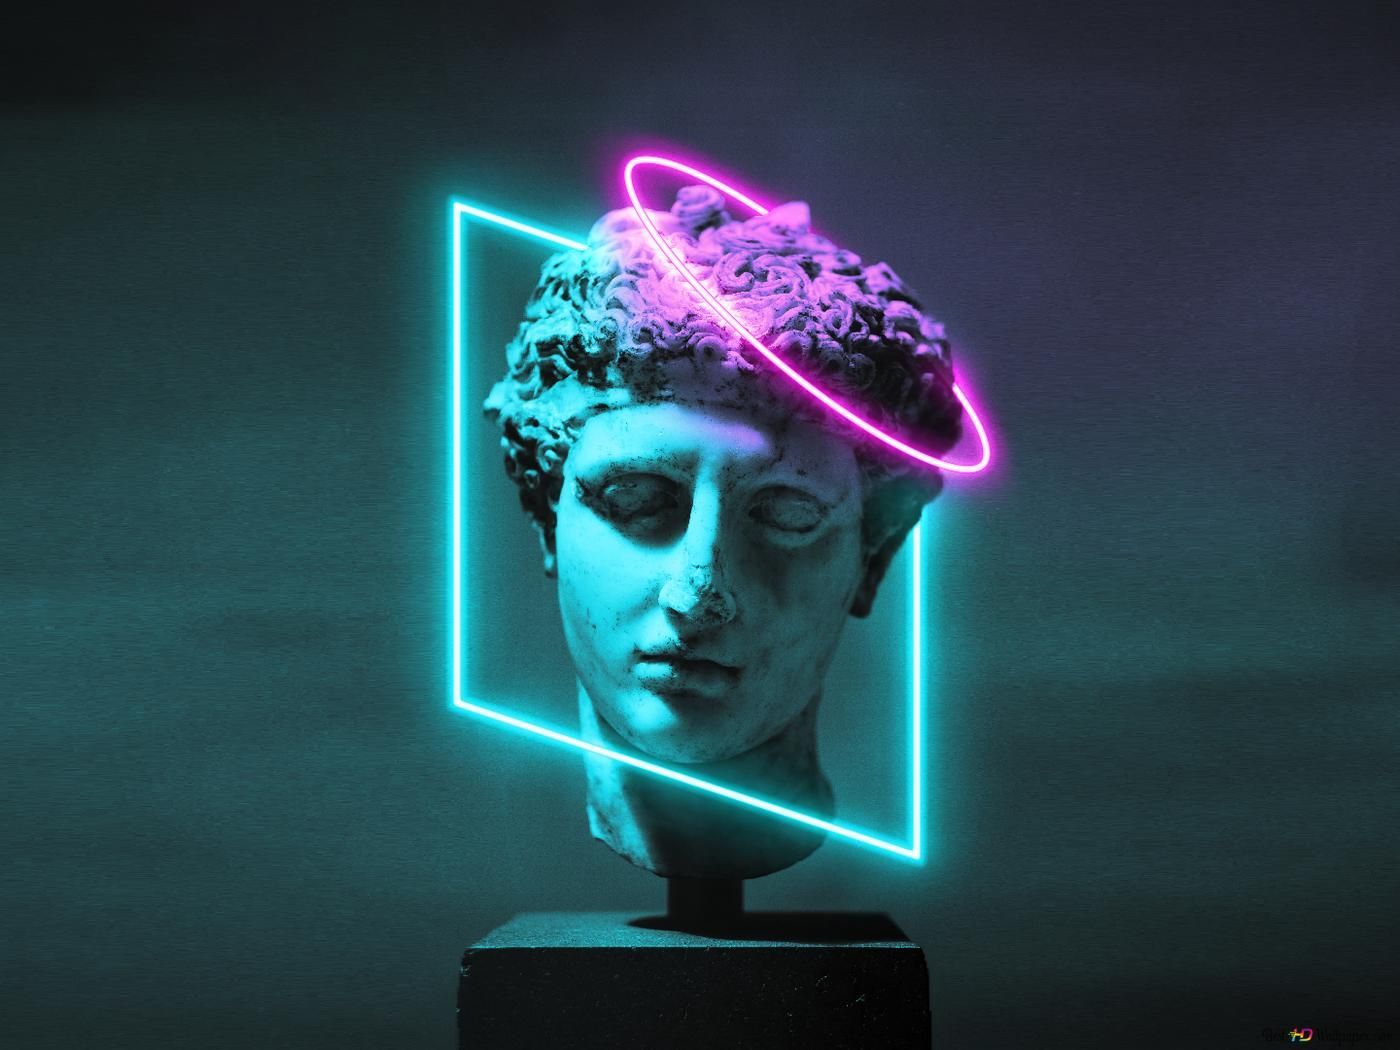 A bust of a man with a neon green and pink light surrounding it - Greek statue